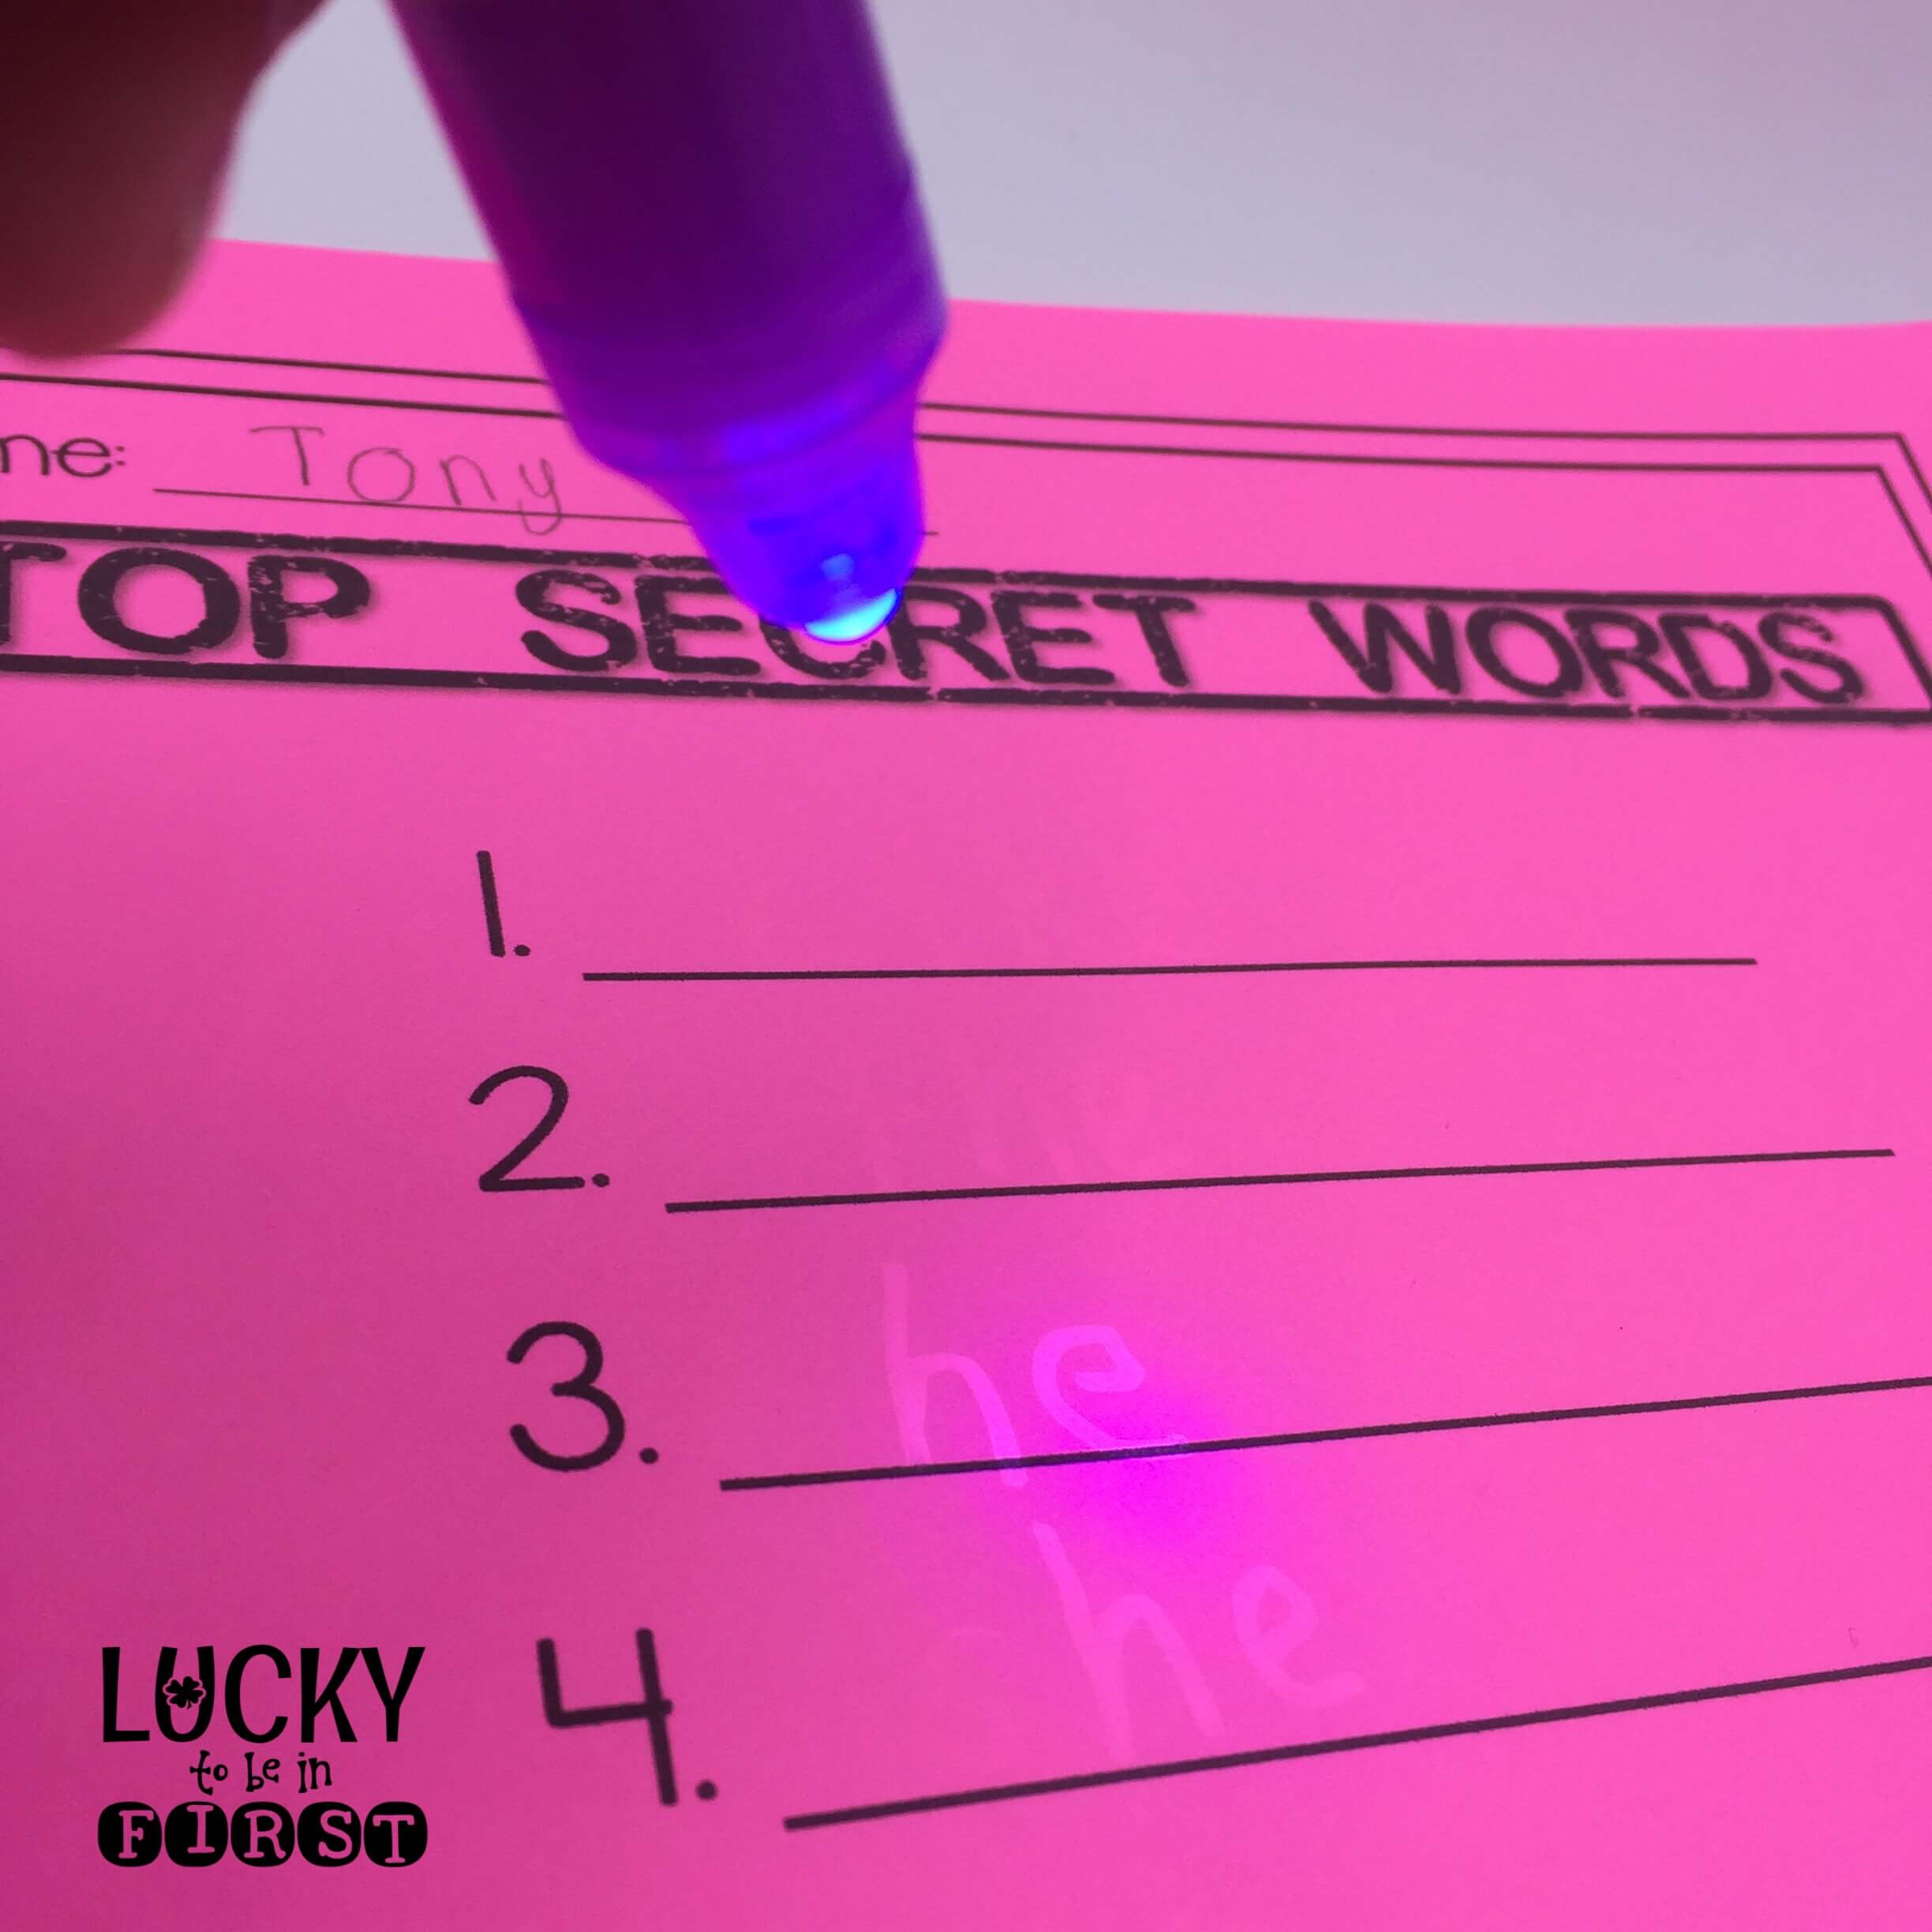 Top Secret Words to Practice Sight Words by Lucky to Be in First